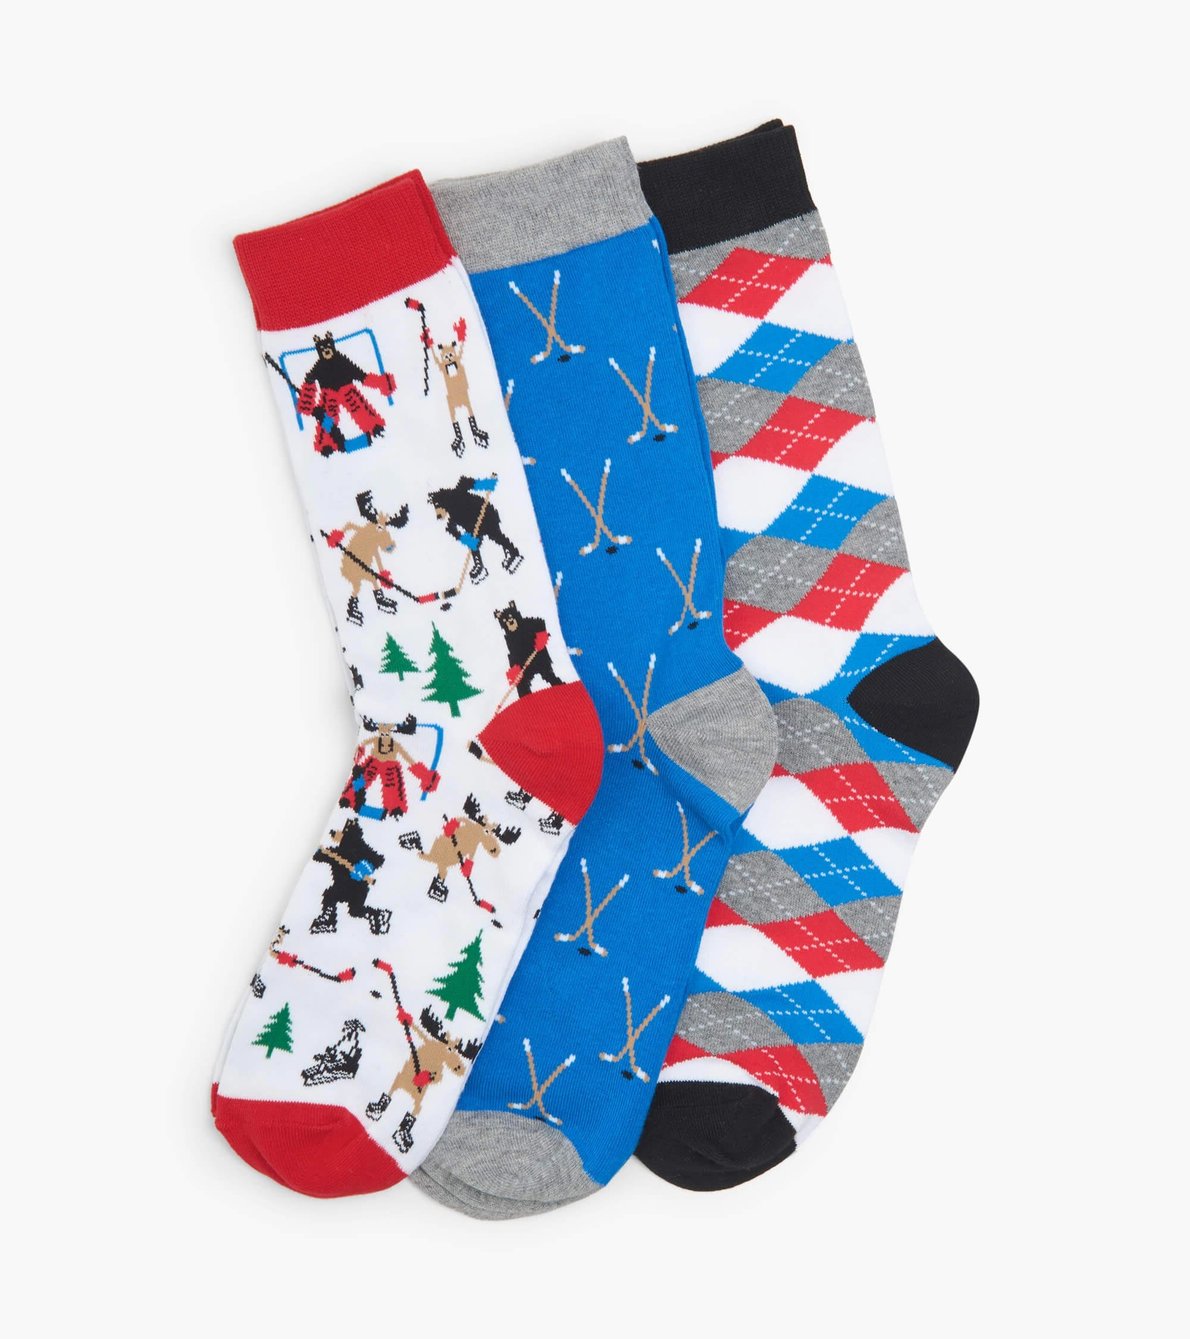 View larger image of Wild About Hockey Men’s Crew Sock Set